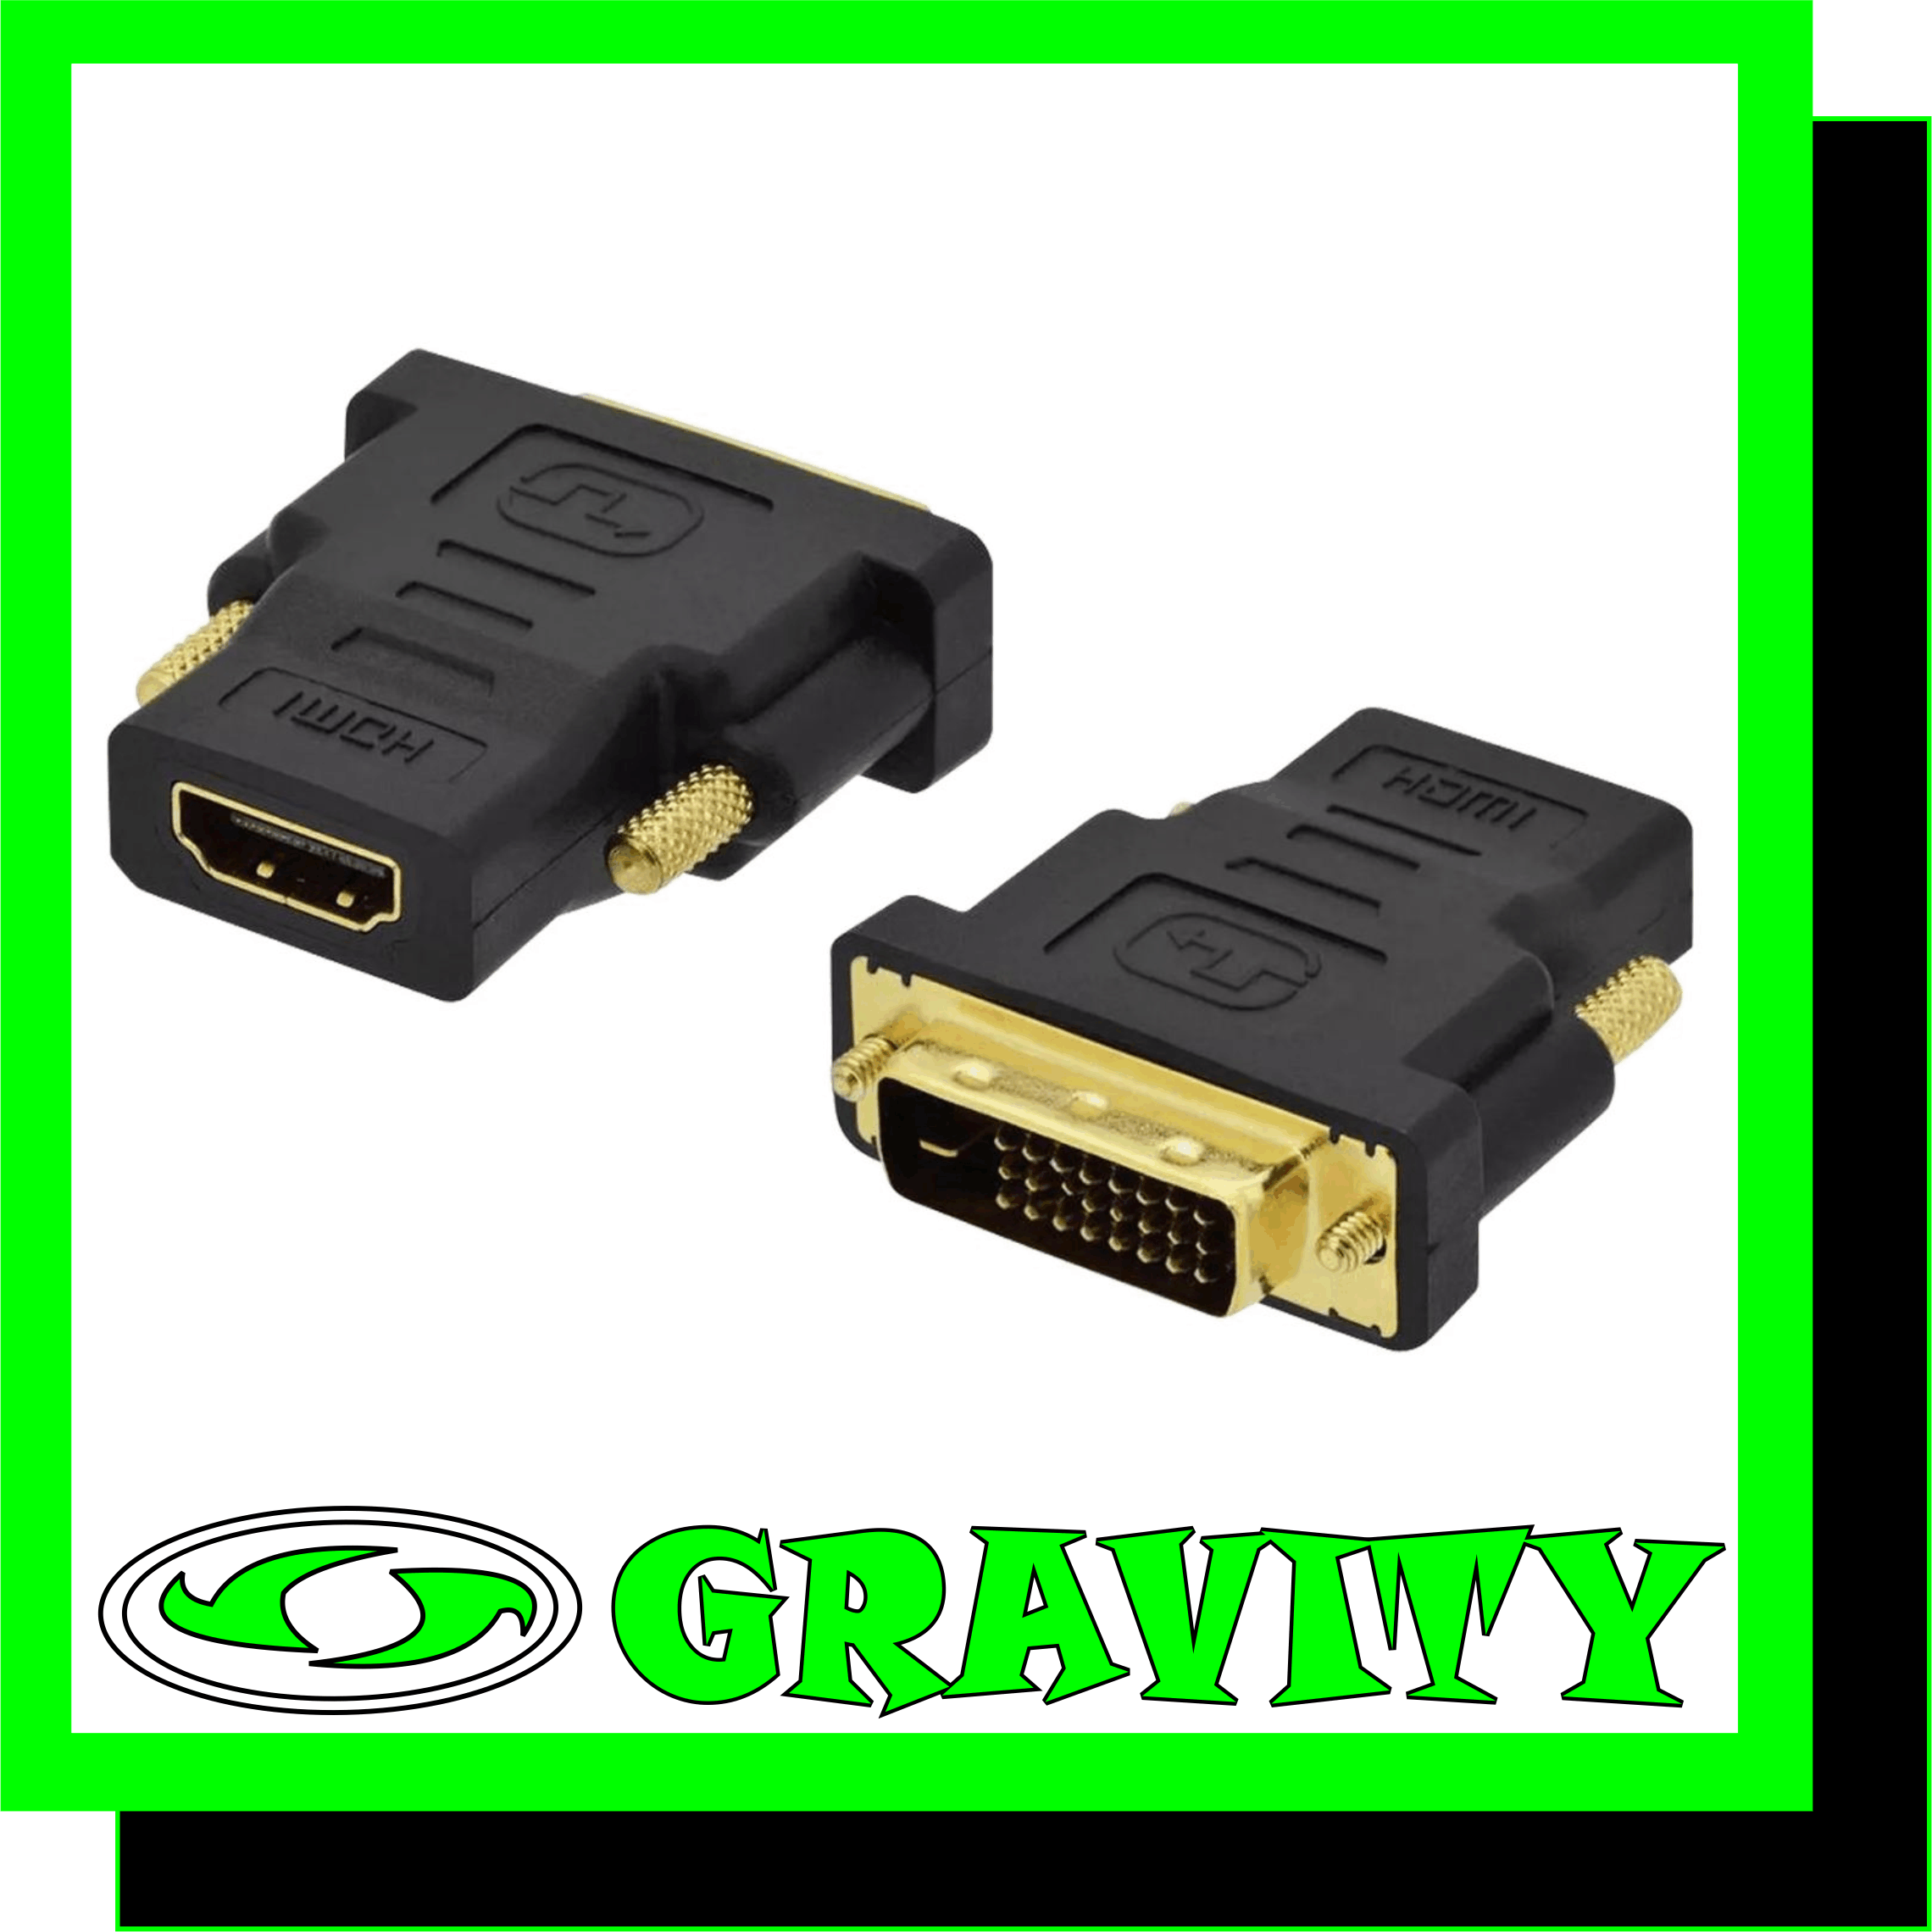 DVI(24+1) male to HDMI female adapter converts an HDMI male connector on your existing cable to a DVI male connector. It can be used to connect HDMI cables to DVI monitors, or HDMI cables to older televisions that have DVI inputs.  Specification: 1. Connector: HDMI Female X 1 2. DVI(24+1) Male X 1